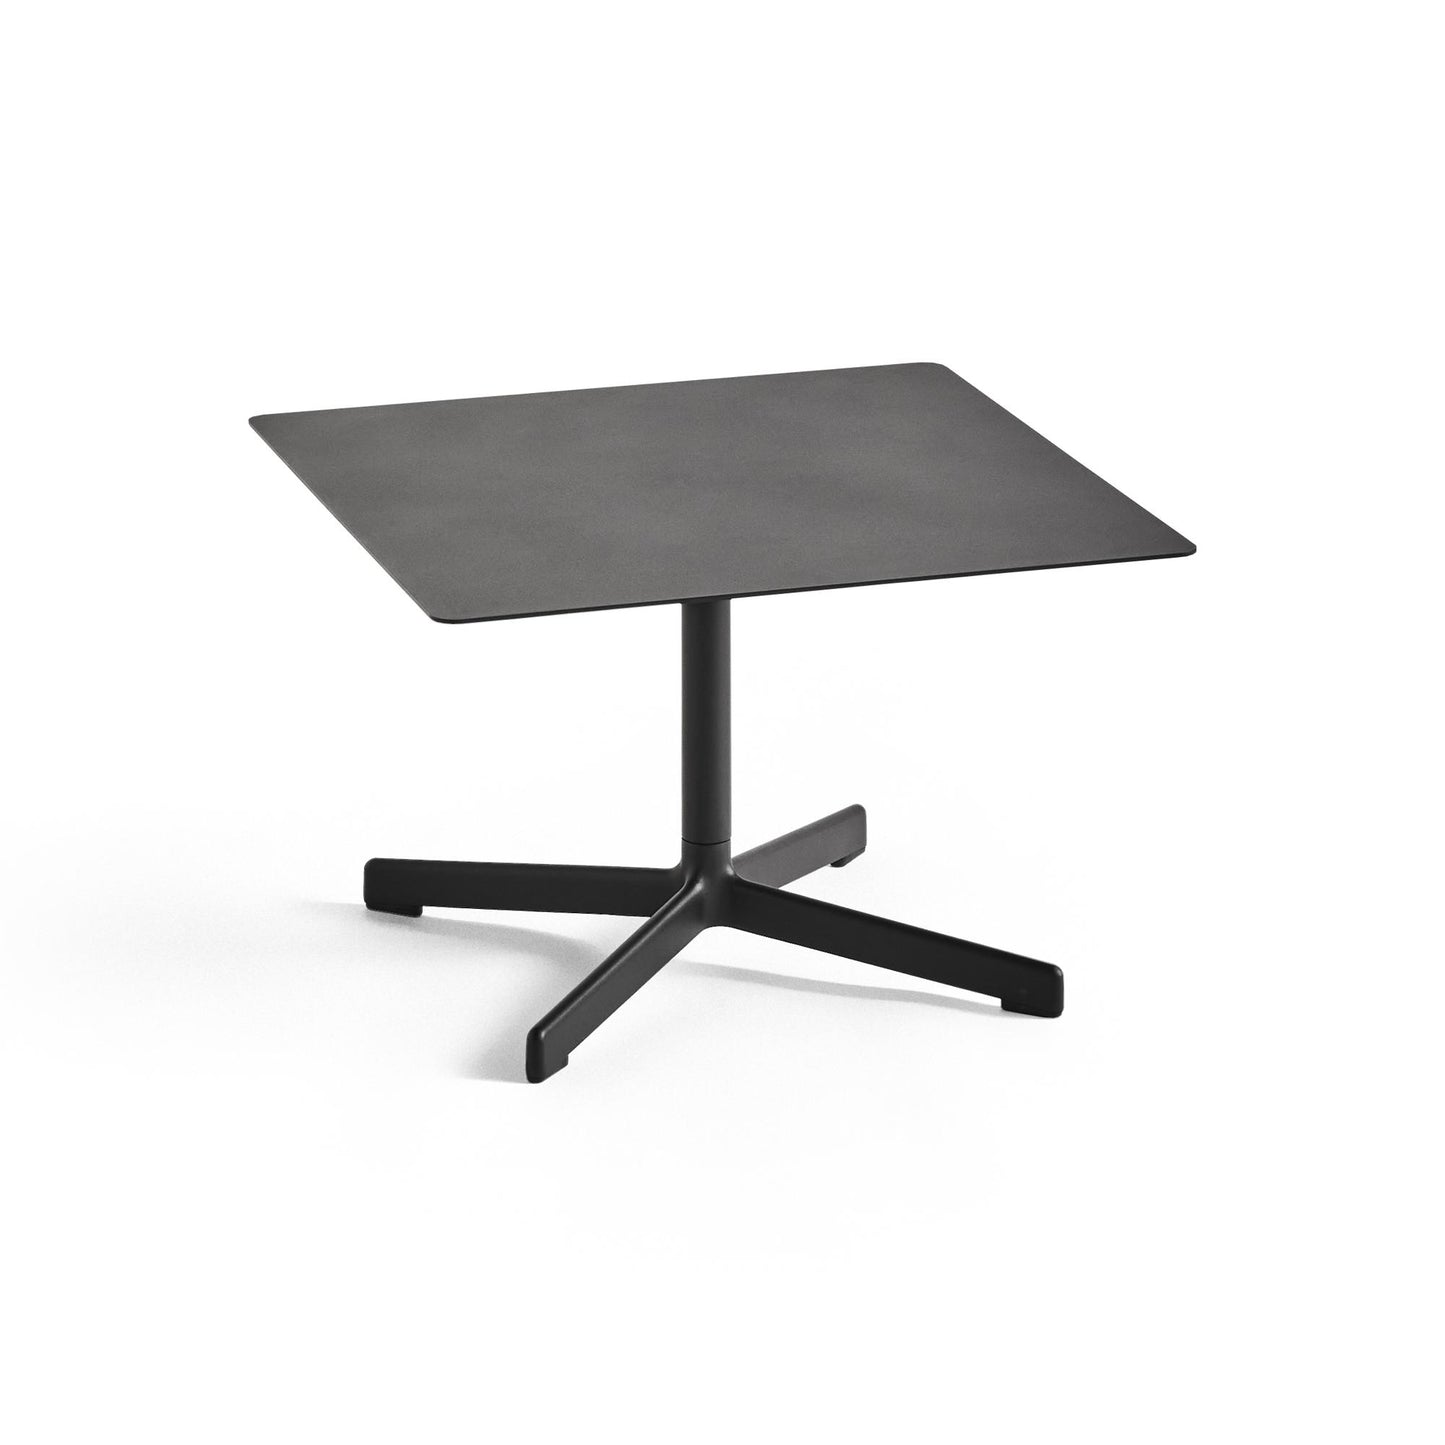 Neu Low Table L60 x H40 by HAY #Anthracite